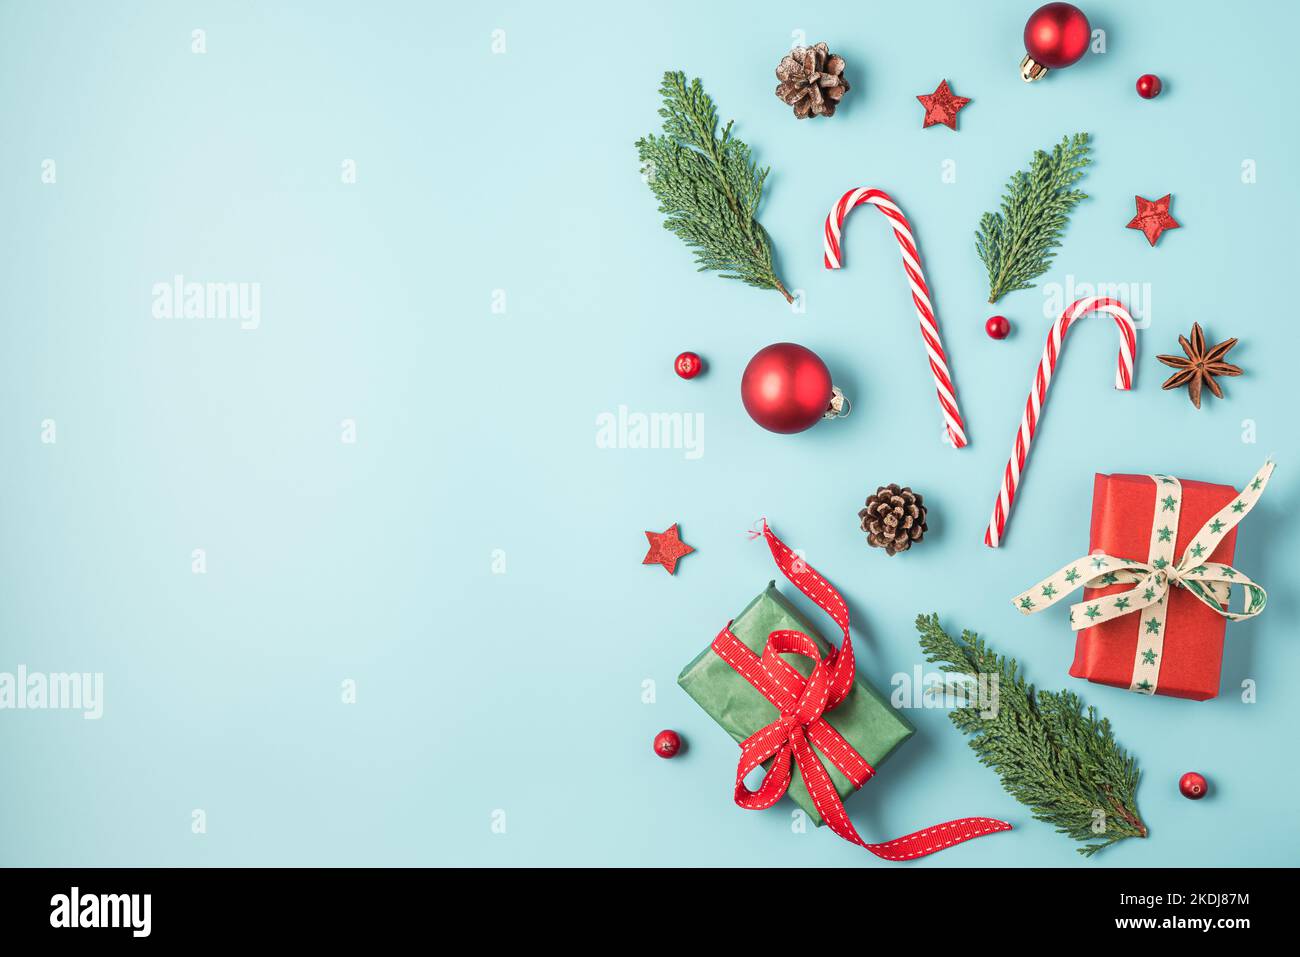 Christmas background with fir tree, holiday decorations, gift boxes on blue background. Flat lay. Top view with copy space. Festive background Stock Photo